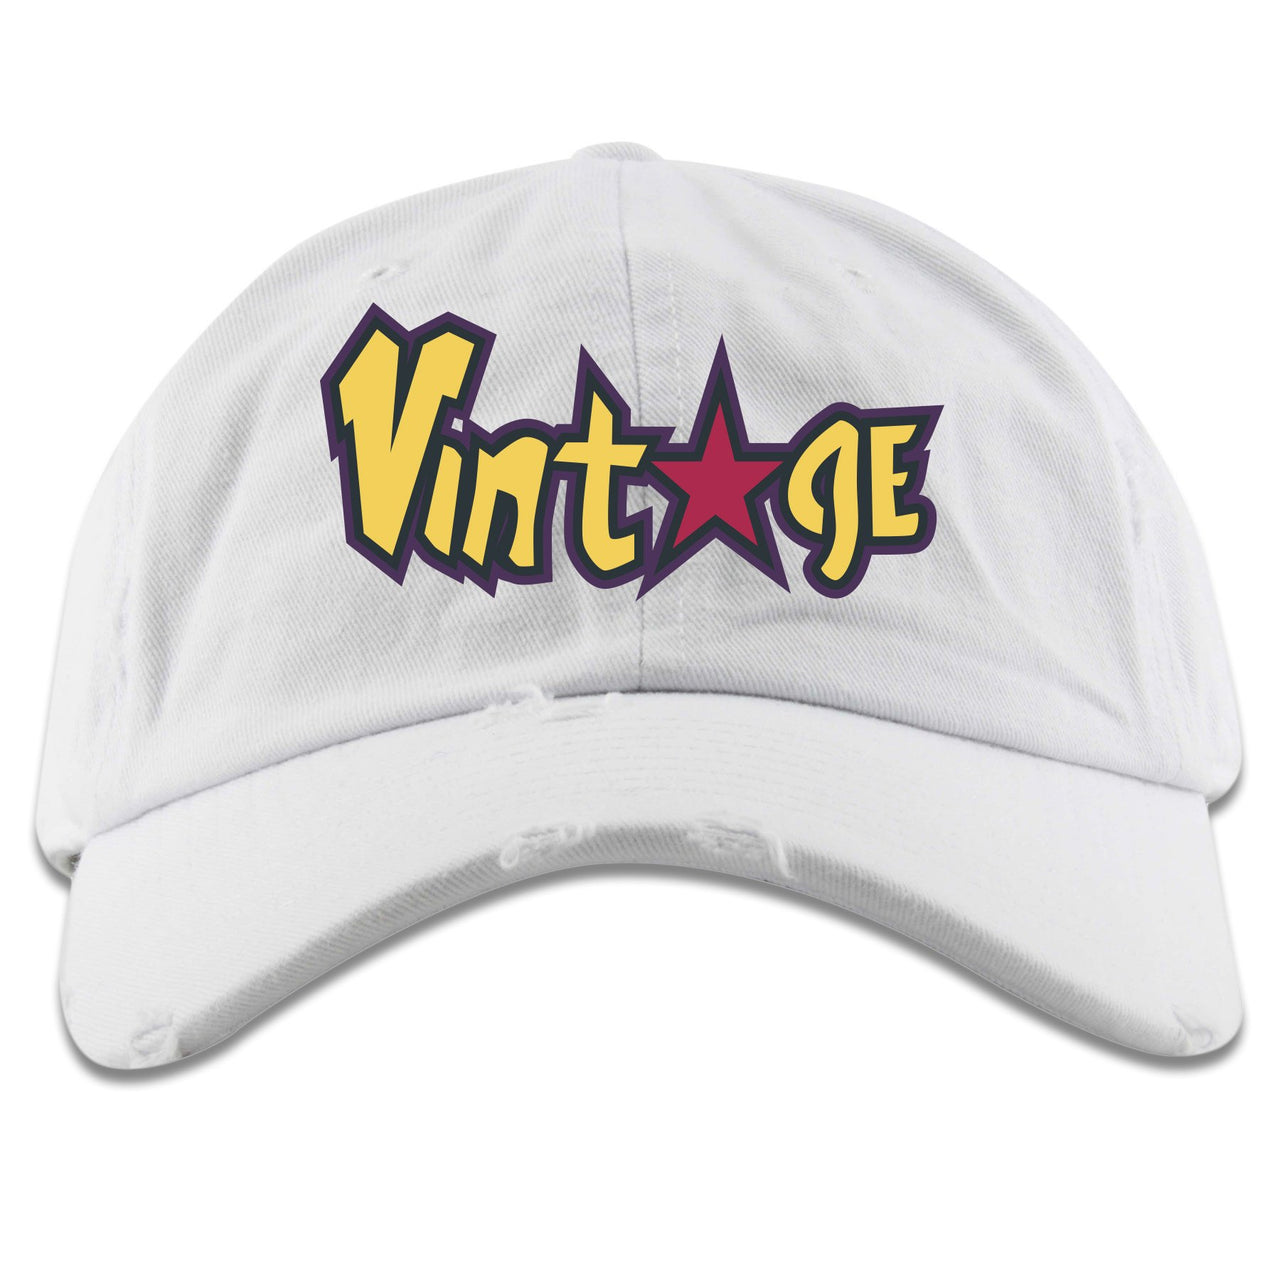 Varsity Maize Mid Blazers Distressed Dad Hat Vintage with Star Logo, White